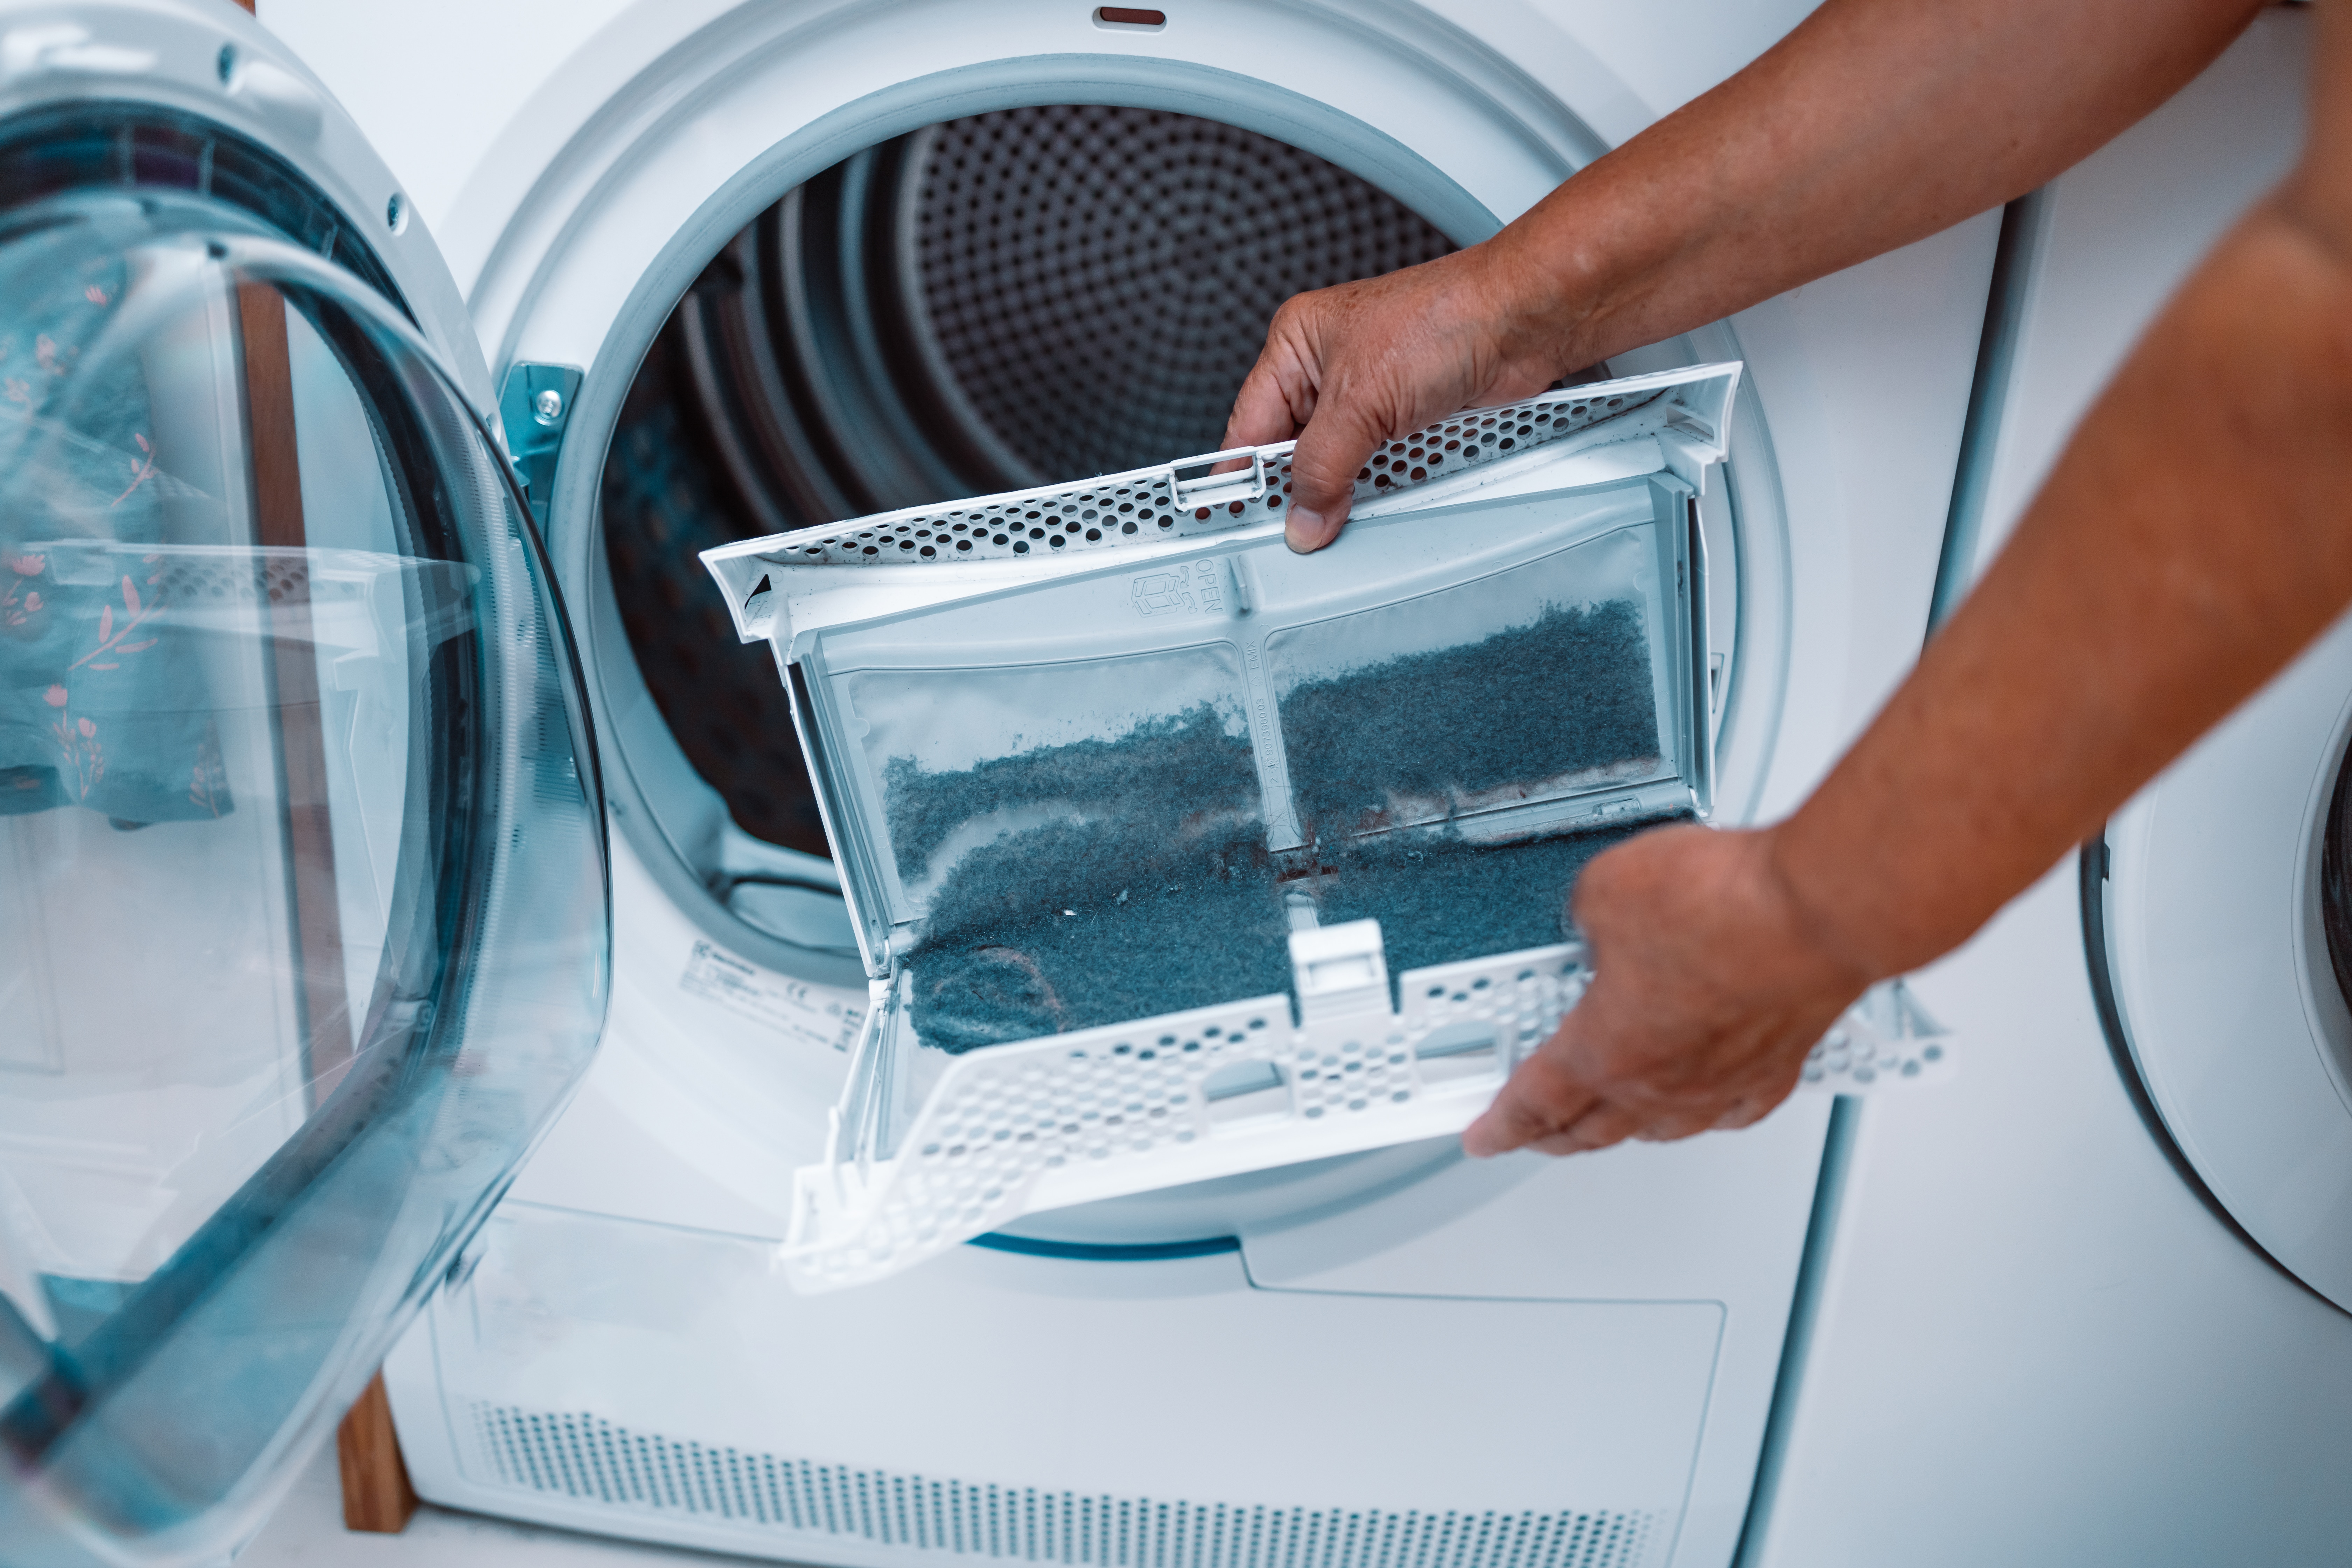 clean your dryer vents prevent fires